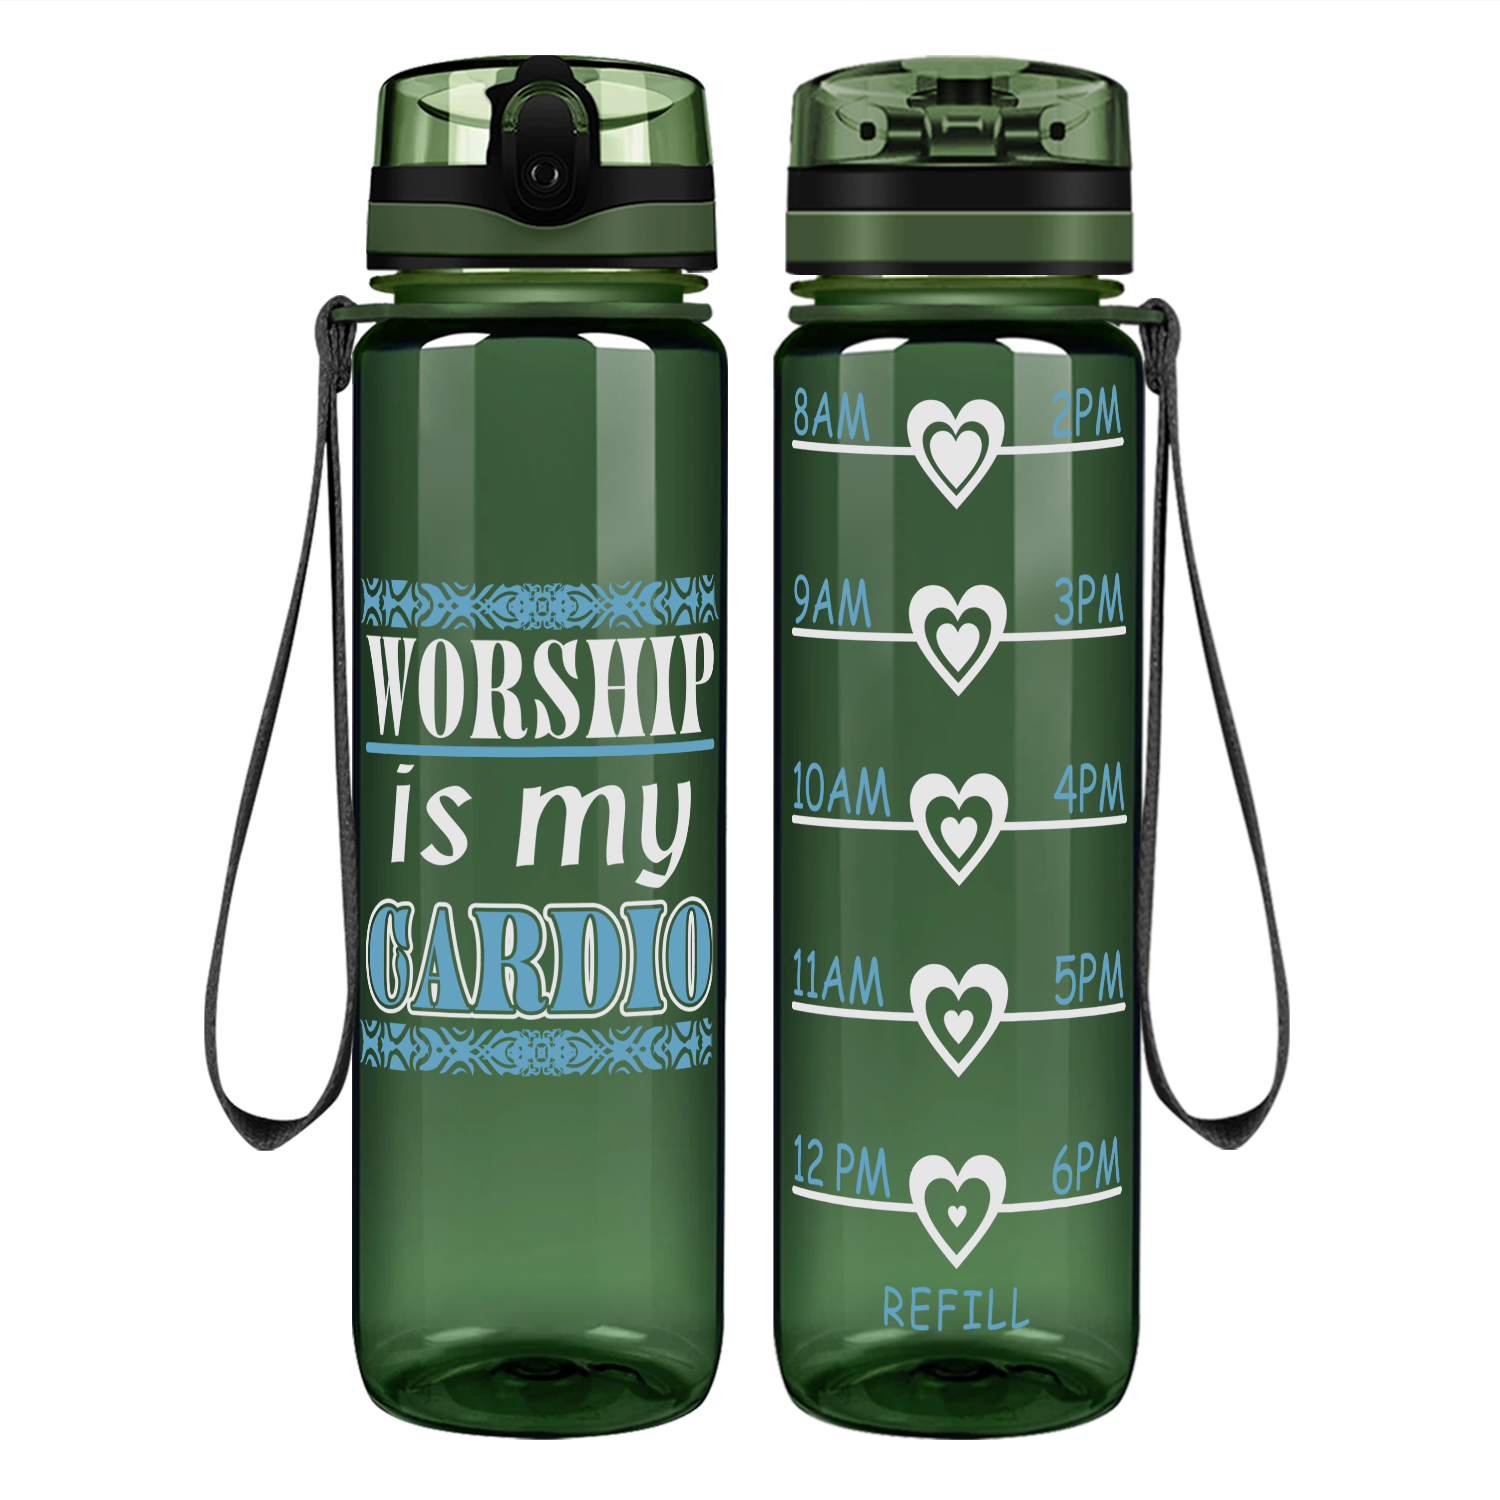 Worship Is My Cardio Motivational Tracking Water Bottle